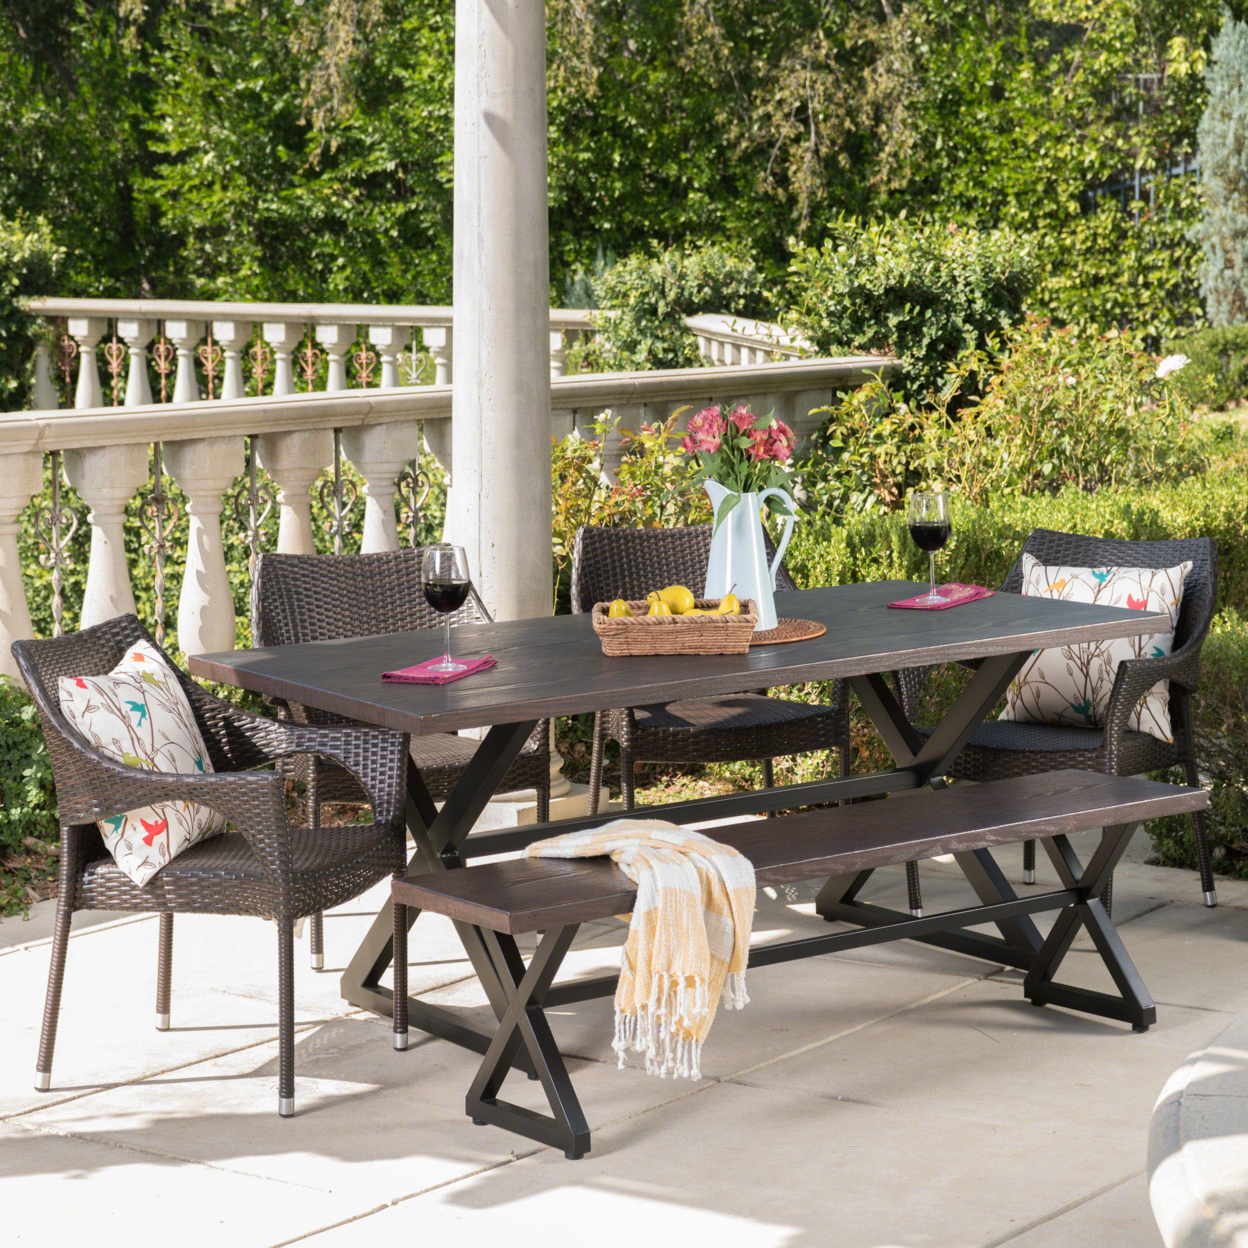 Ismus Outdoor 6 Piece Aluminum Dining Set With Bench And Stacking Chairs - Black/Multi-brown